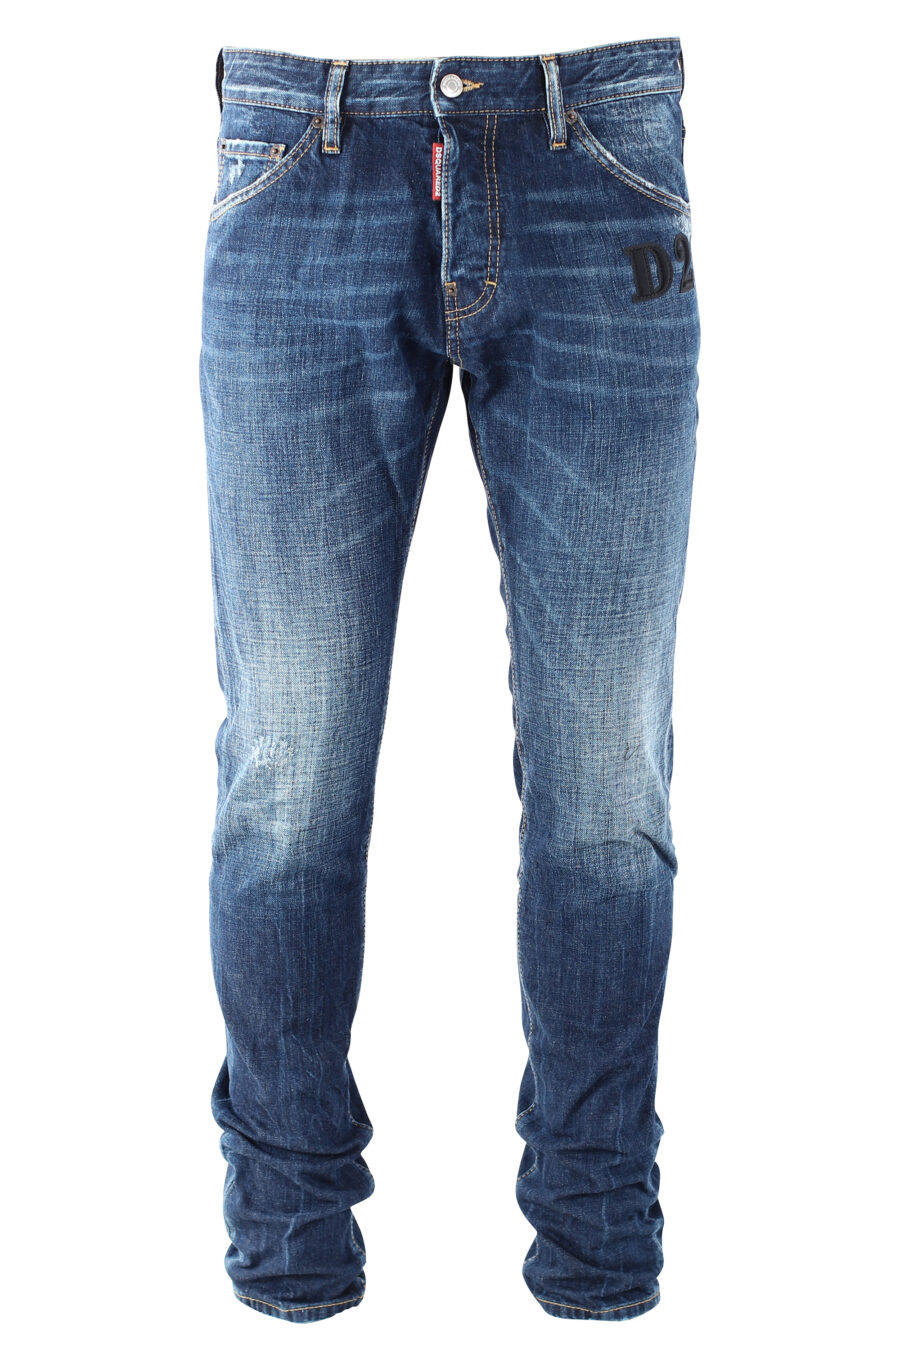 Jeans "cool guy jean" blue with black "D2" logo - IMG 9686